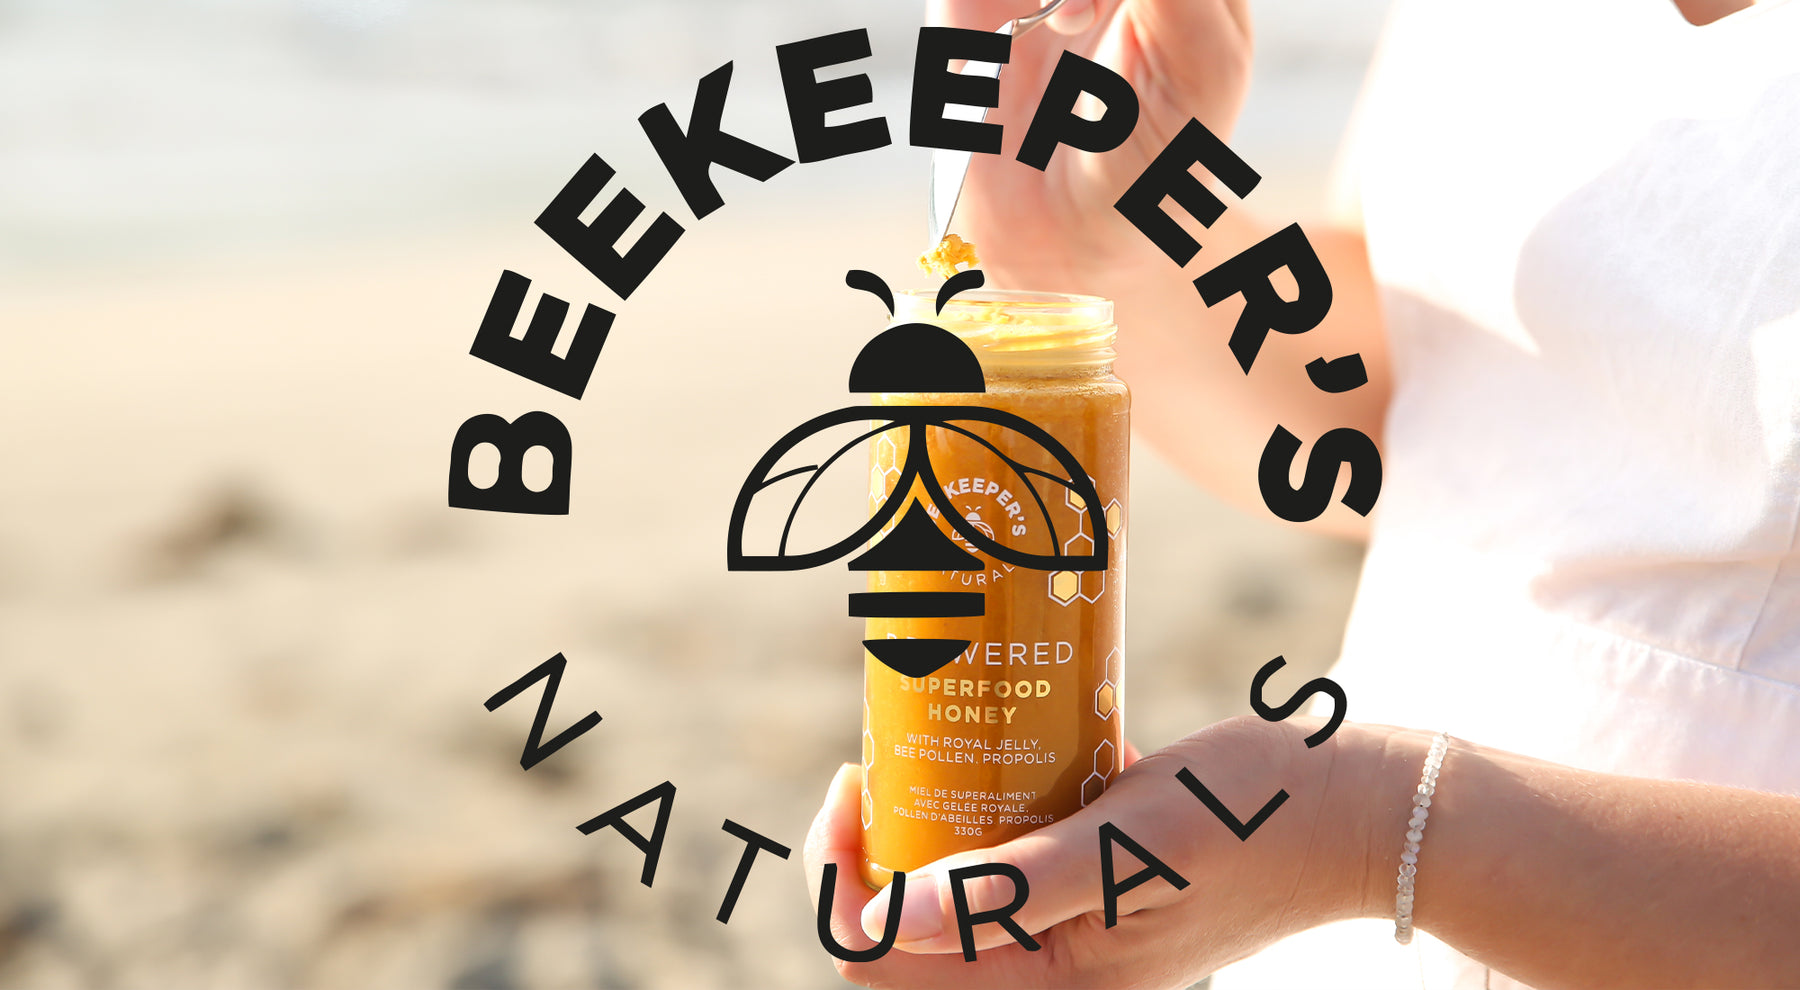 Welcoming Beekeeper’s Naturals to the C6.ca Hive!